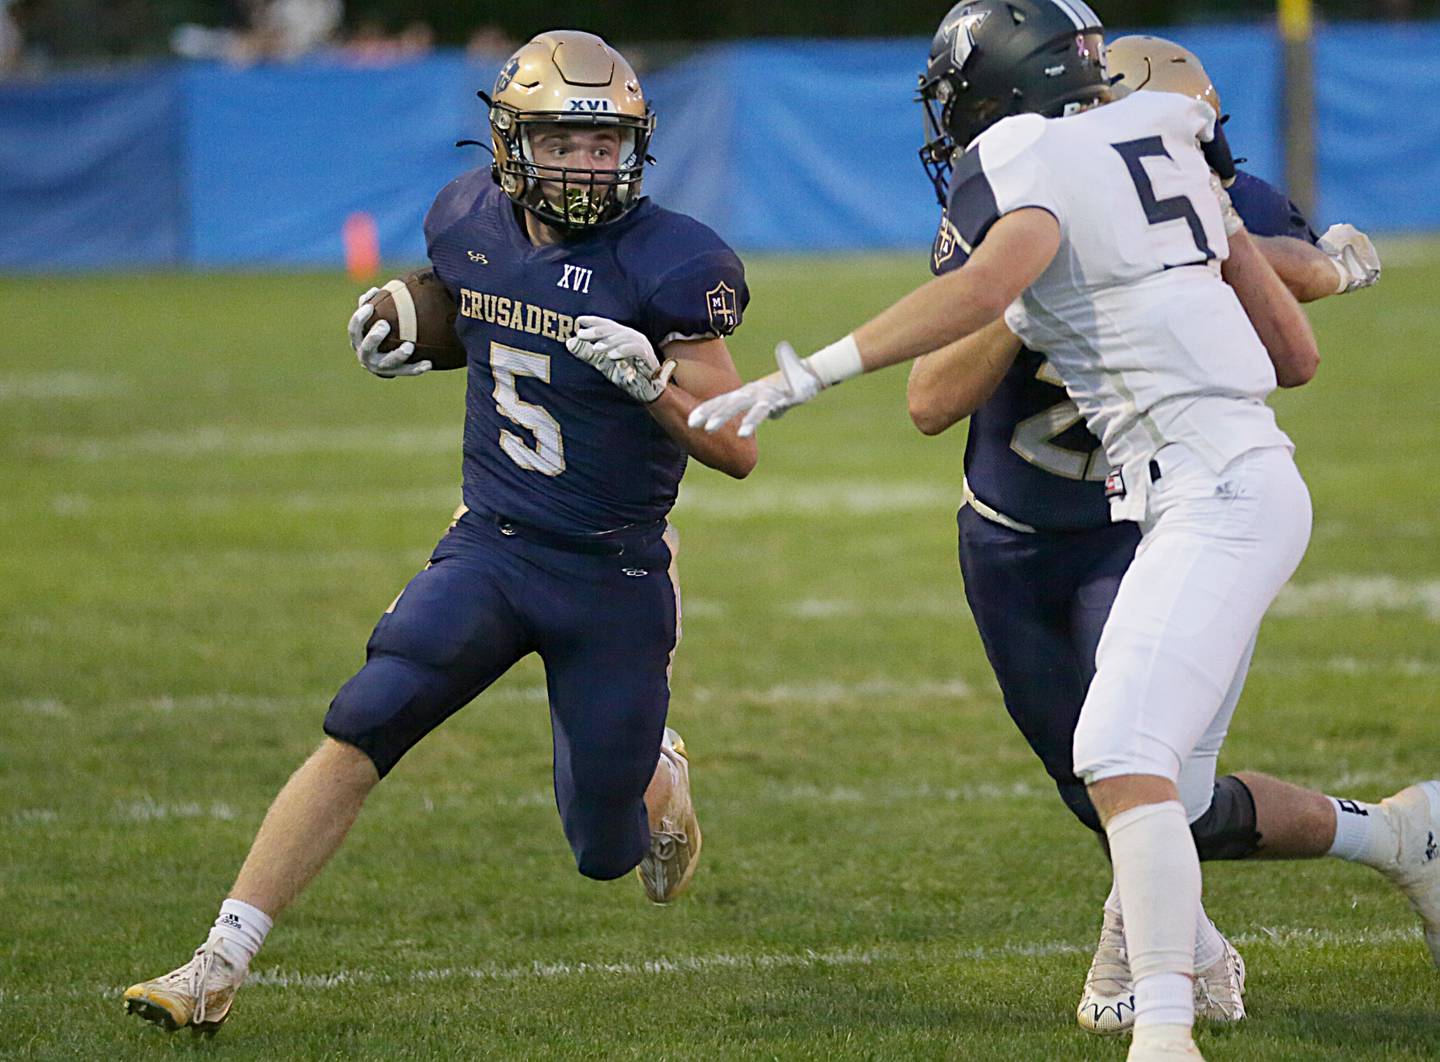 Marquette's Tom Durdan (5) runs the ball up the field against Wethersfield on Friday, Sept. 16, 2022 at Gould Stadium in Ottawa.